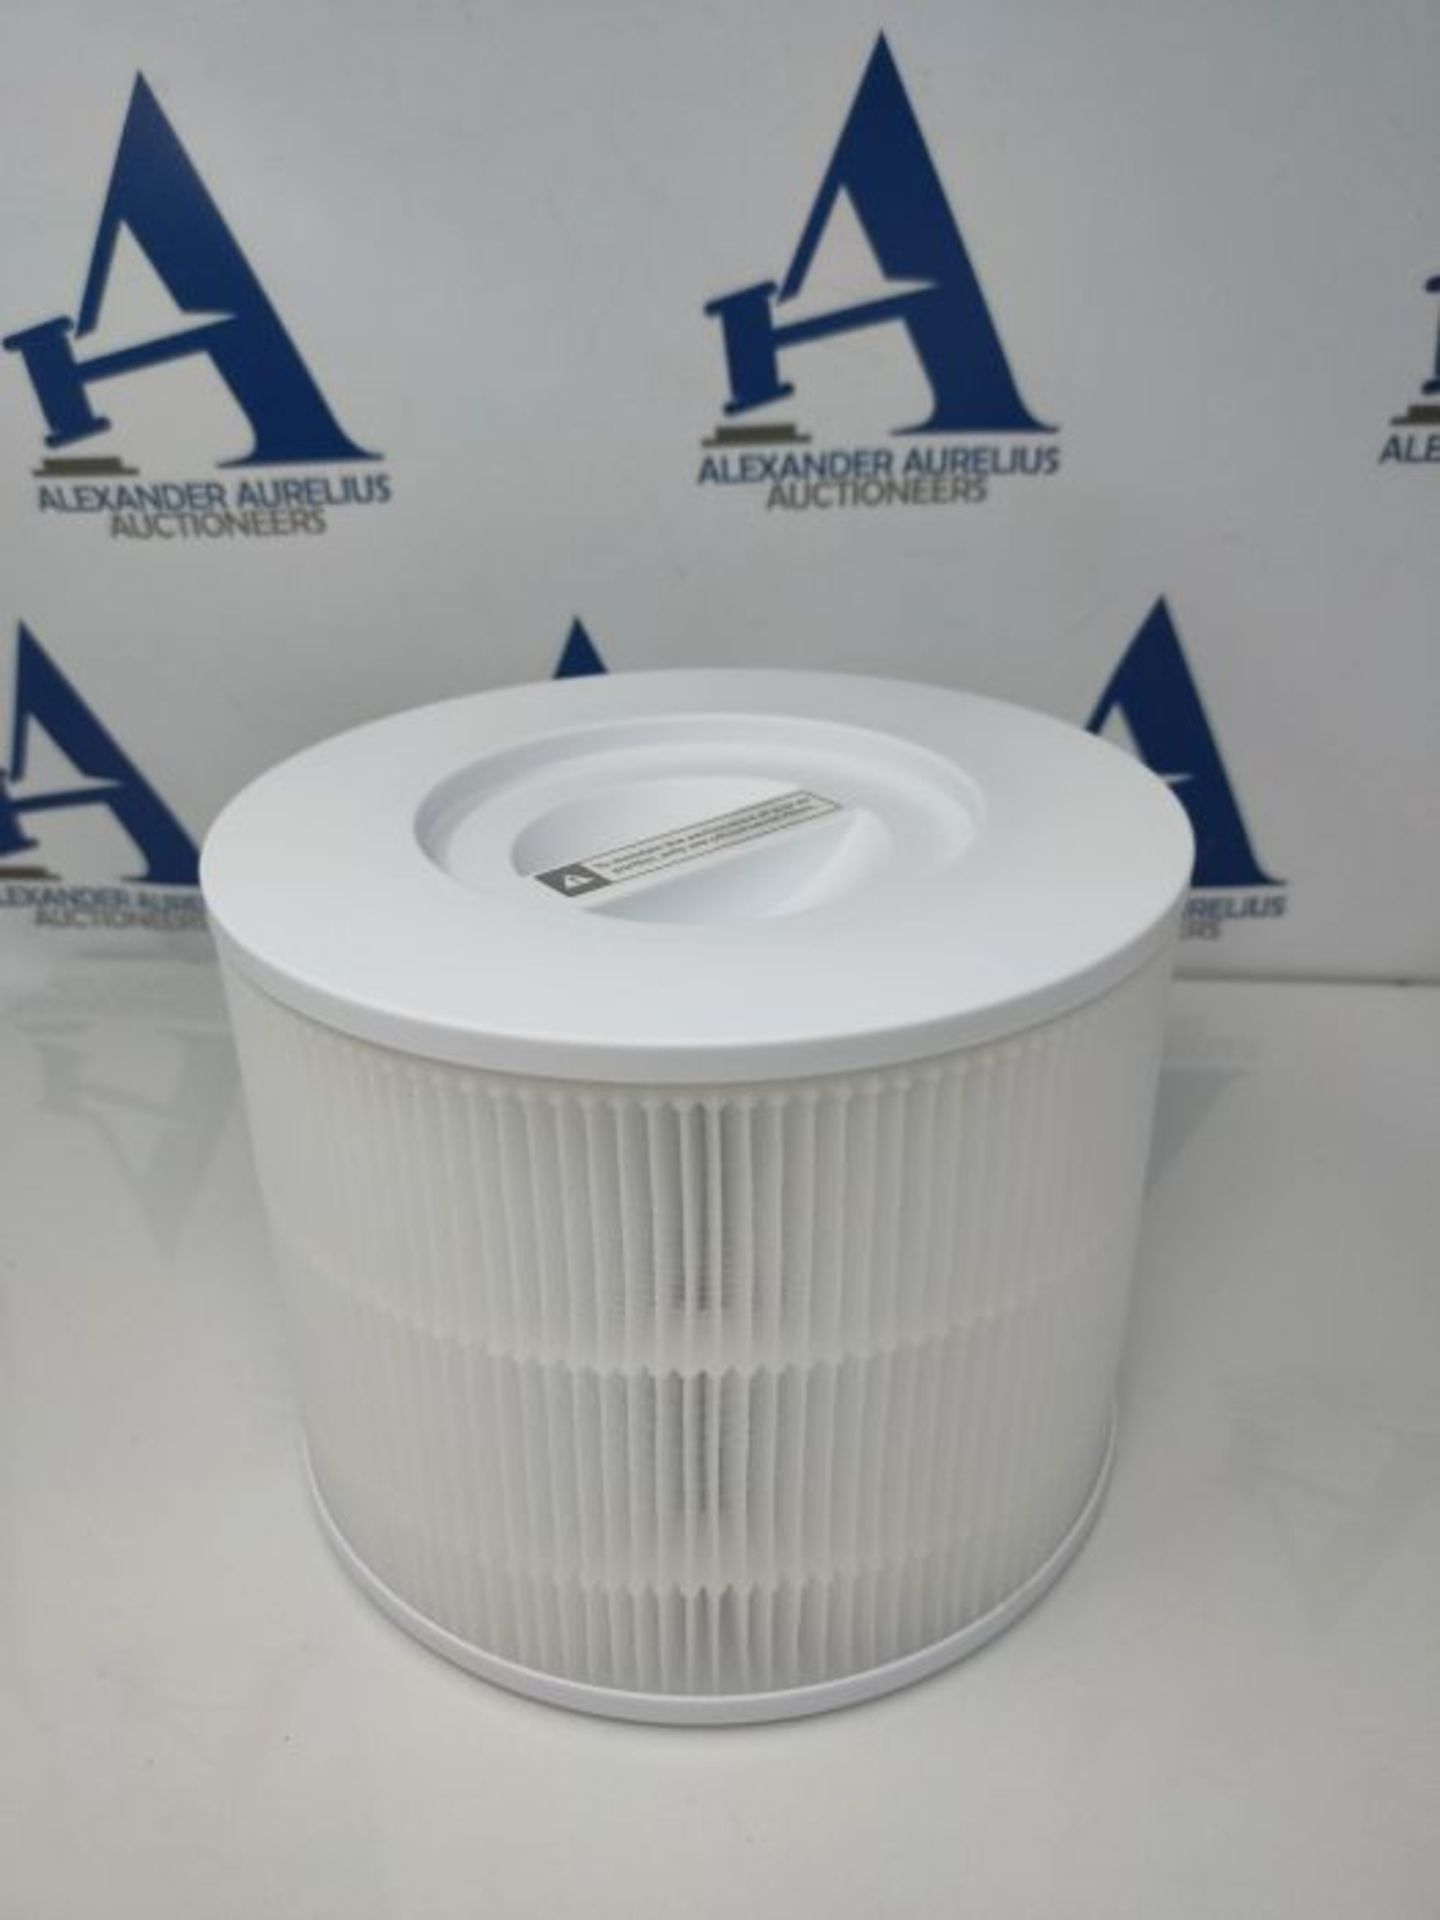 LEVOIT Air Purifier Replacement Filter, 3-in-1 H13 HEPA, High-Efficiency Activated Car - Image 3 of 3